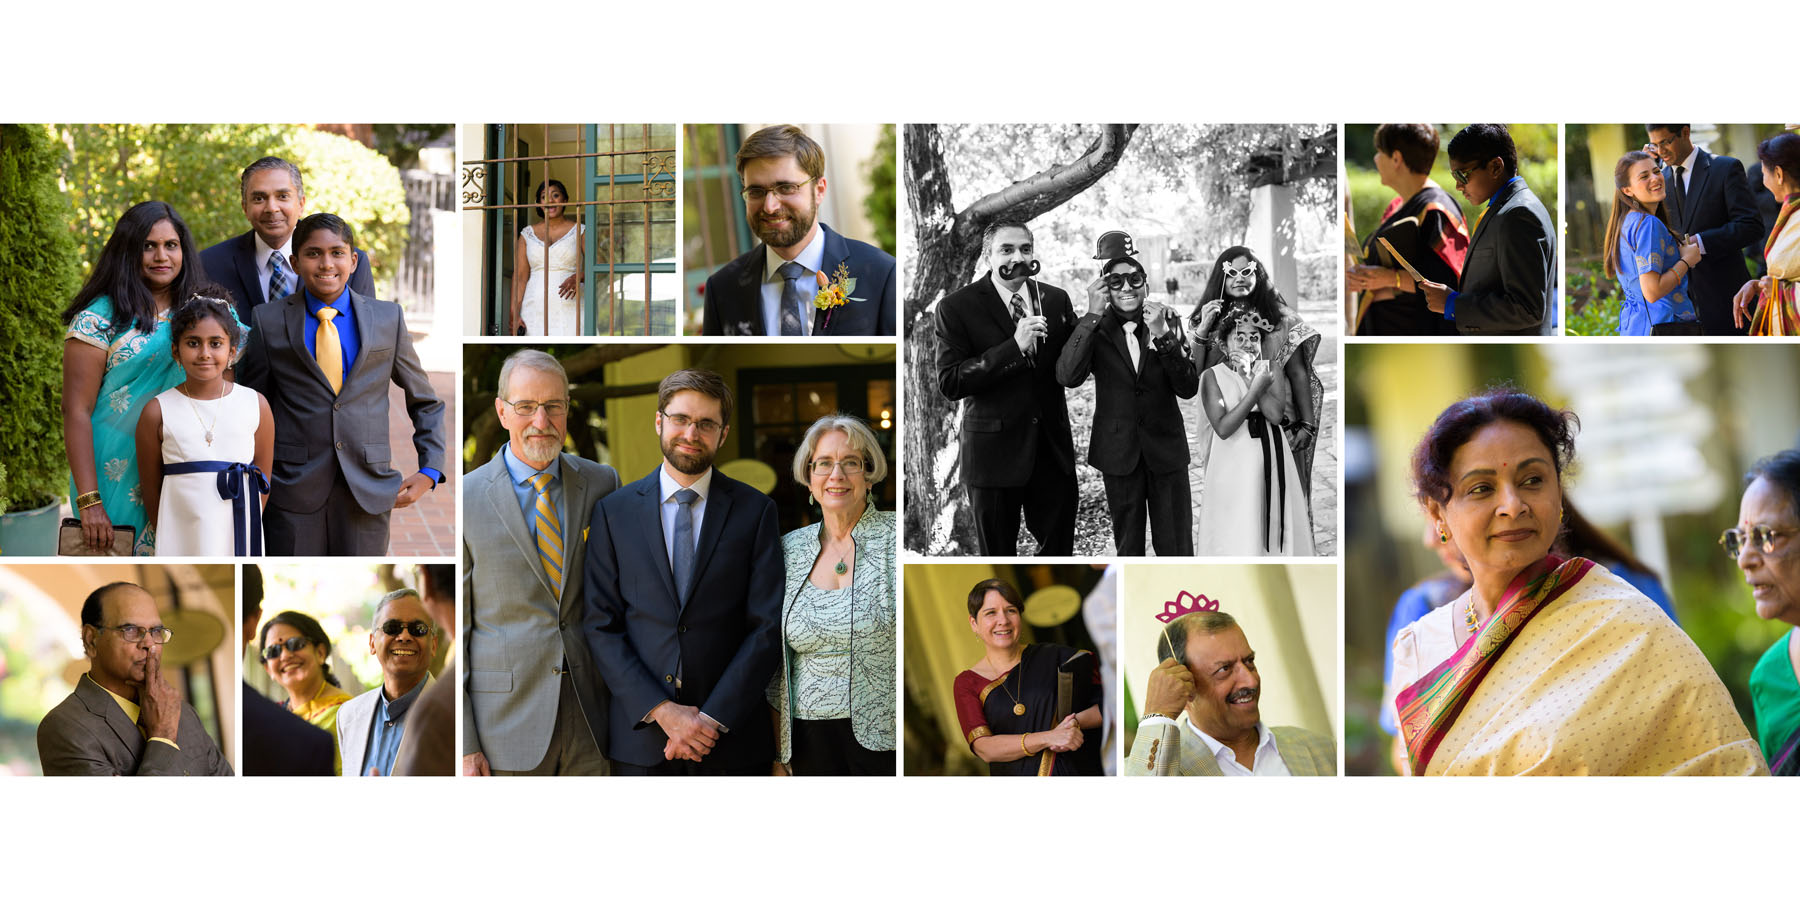 Candids of guests – Allied Arts Guild – Menlo Park wedding photos – by Bay Area wedding photographer Chris Schmauch